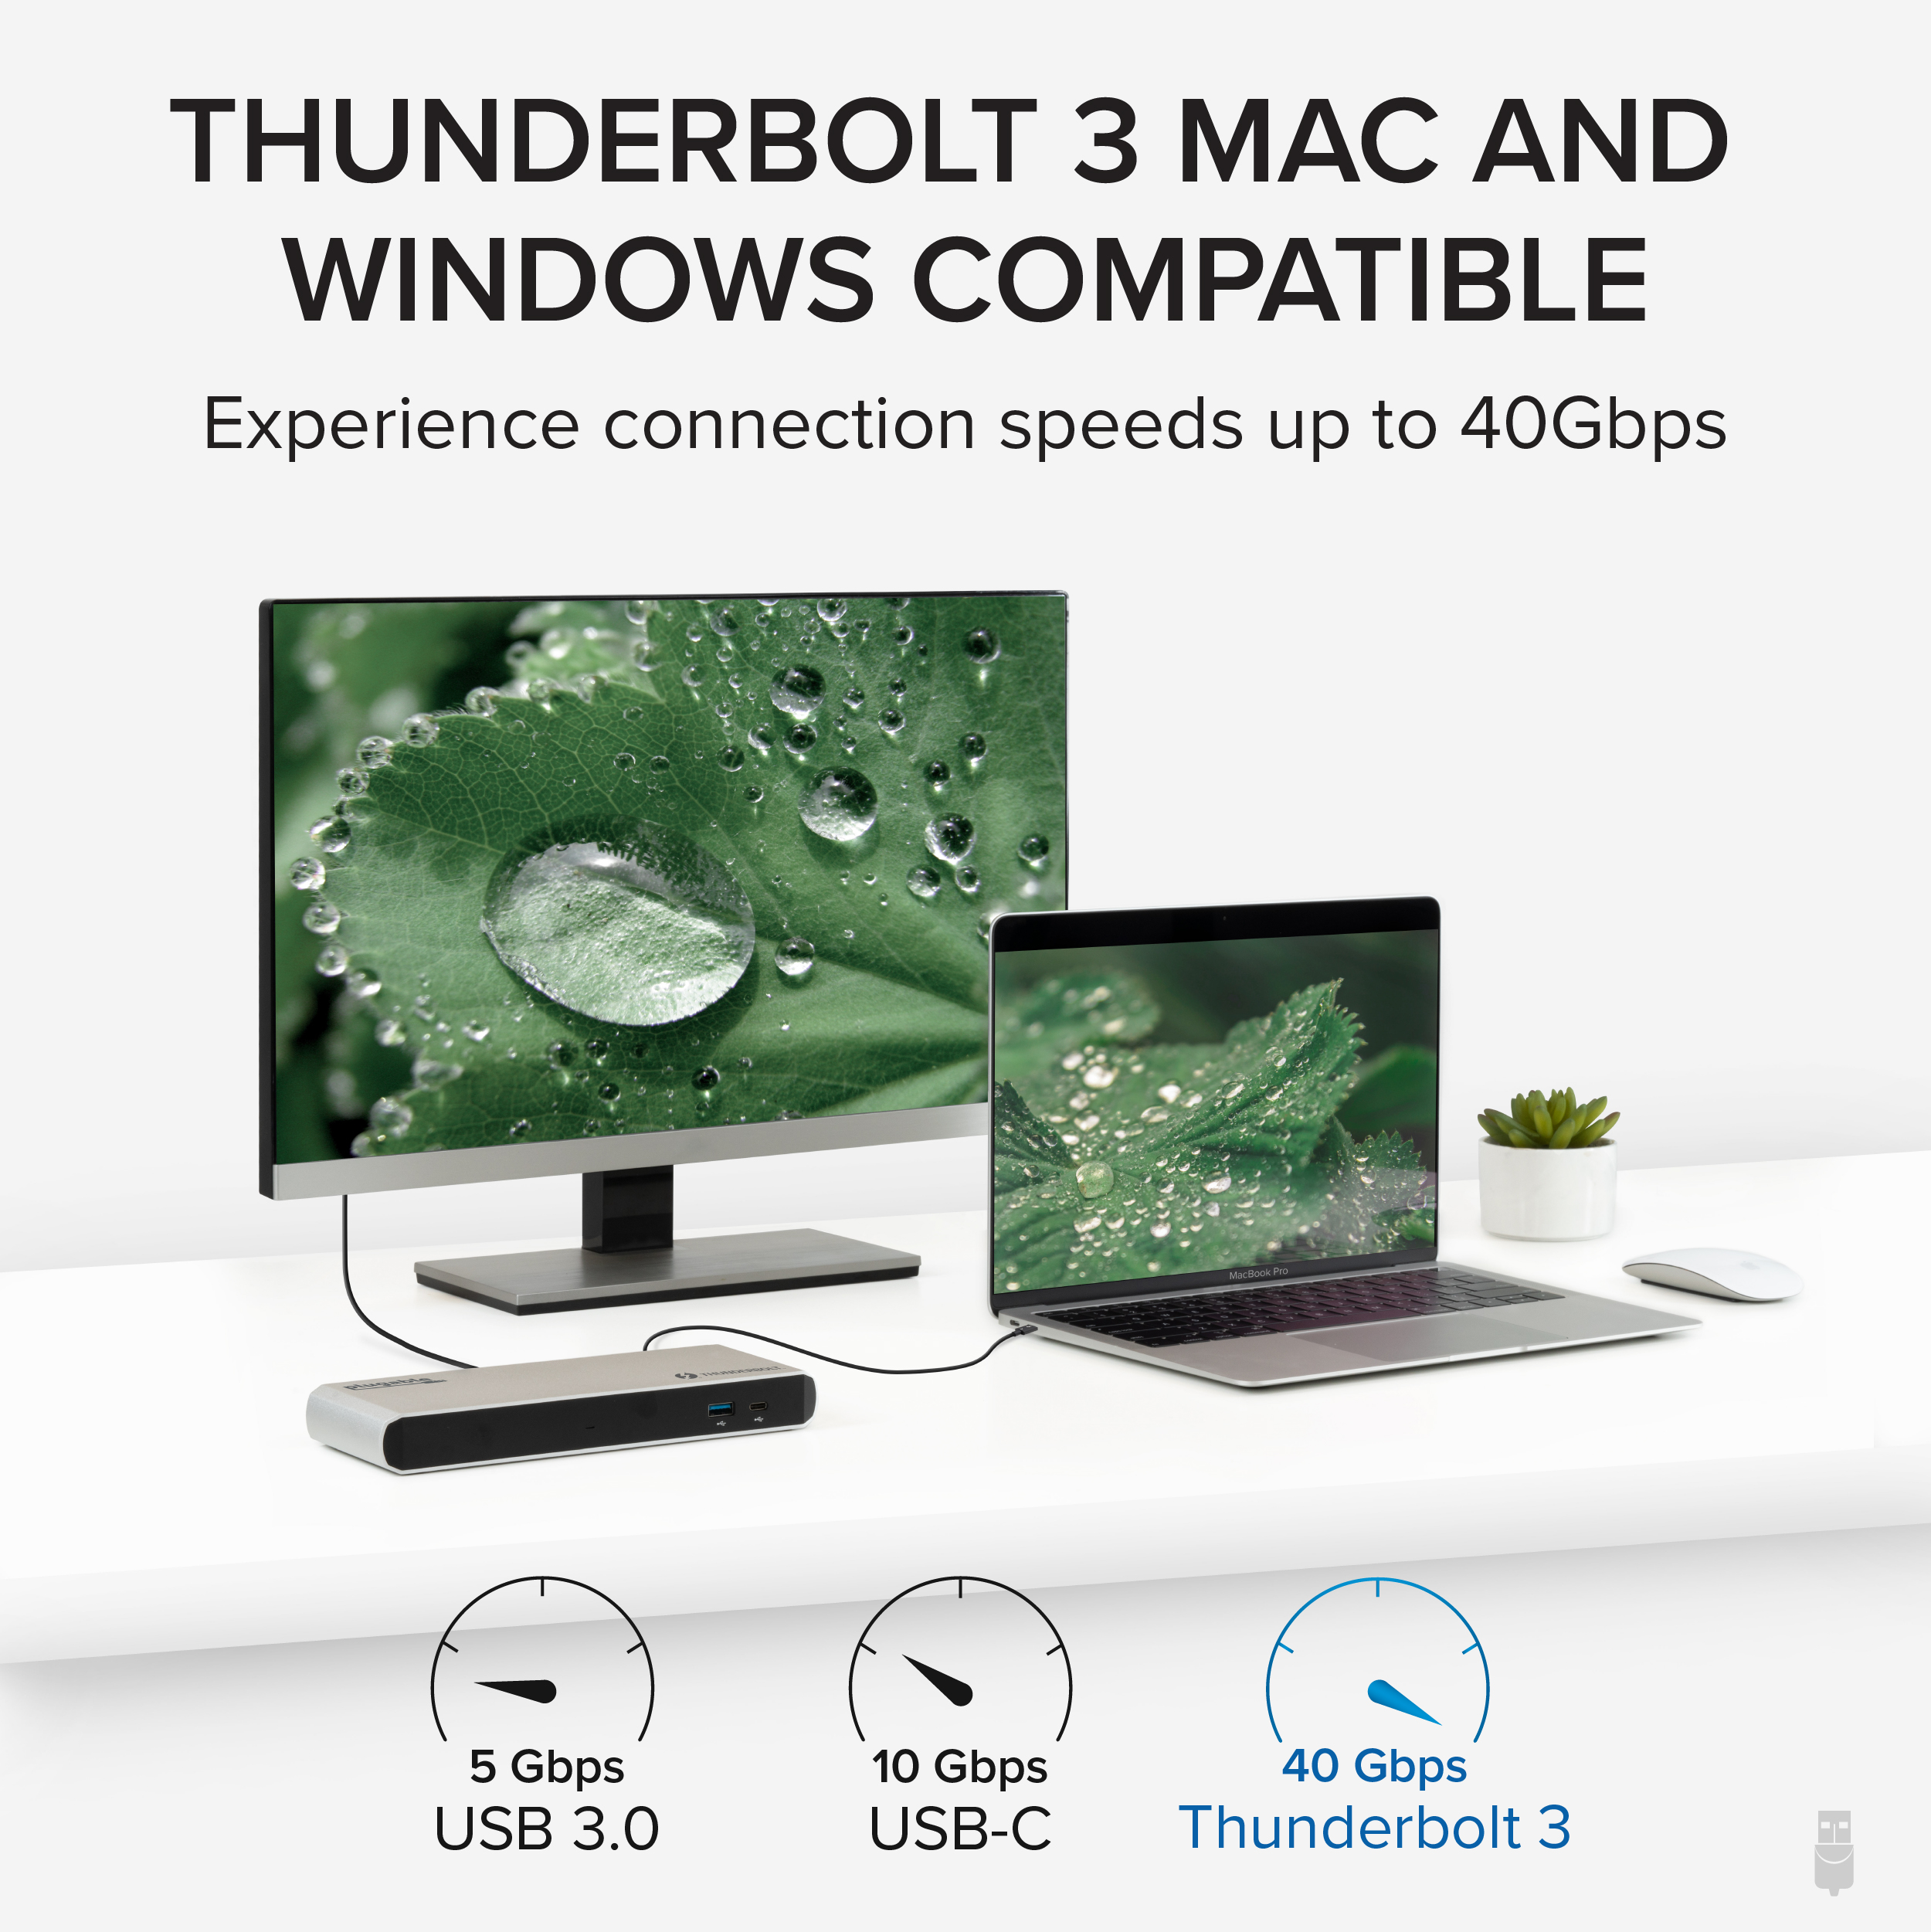 Plugable Thunderbolt 3 Dock Compatible with MacBook Pro and Thunderbolt 3 PCs (4K DisplayPort or HDMI, 1Gb Ethernet, Audio, 3 USB Ports, 85W Charging) - image 5 of 8